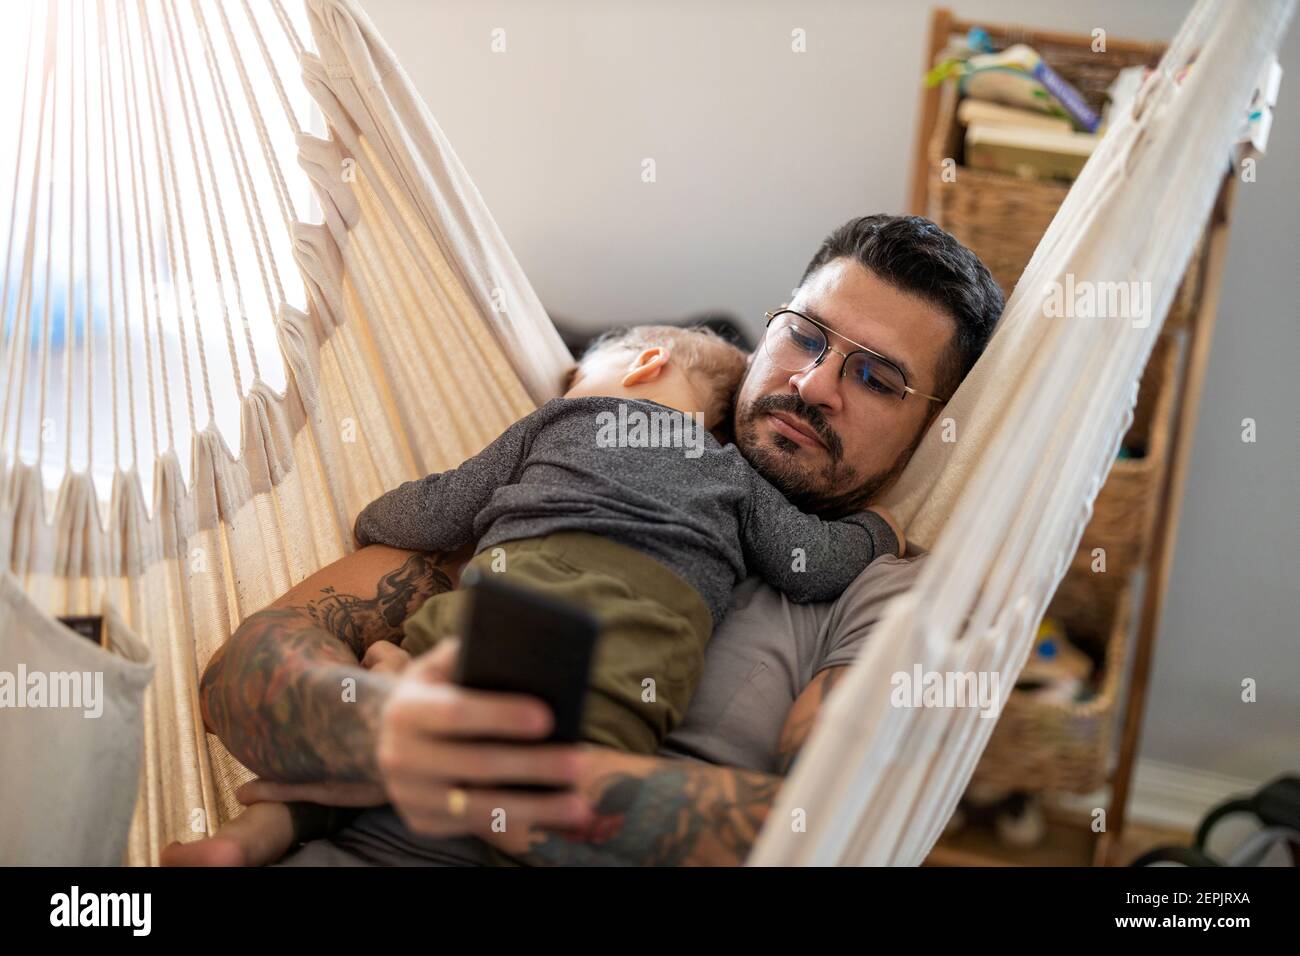 Man checking his phone while his little baby son is sleeping Stock Photo